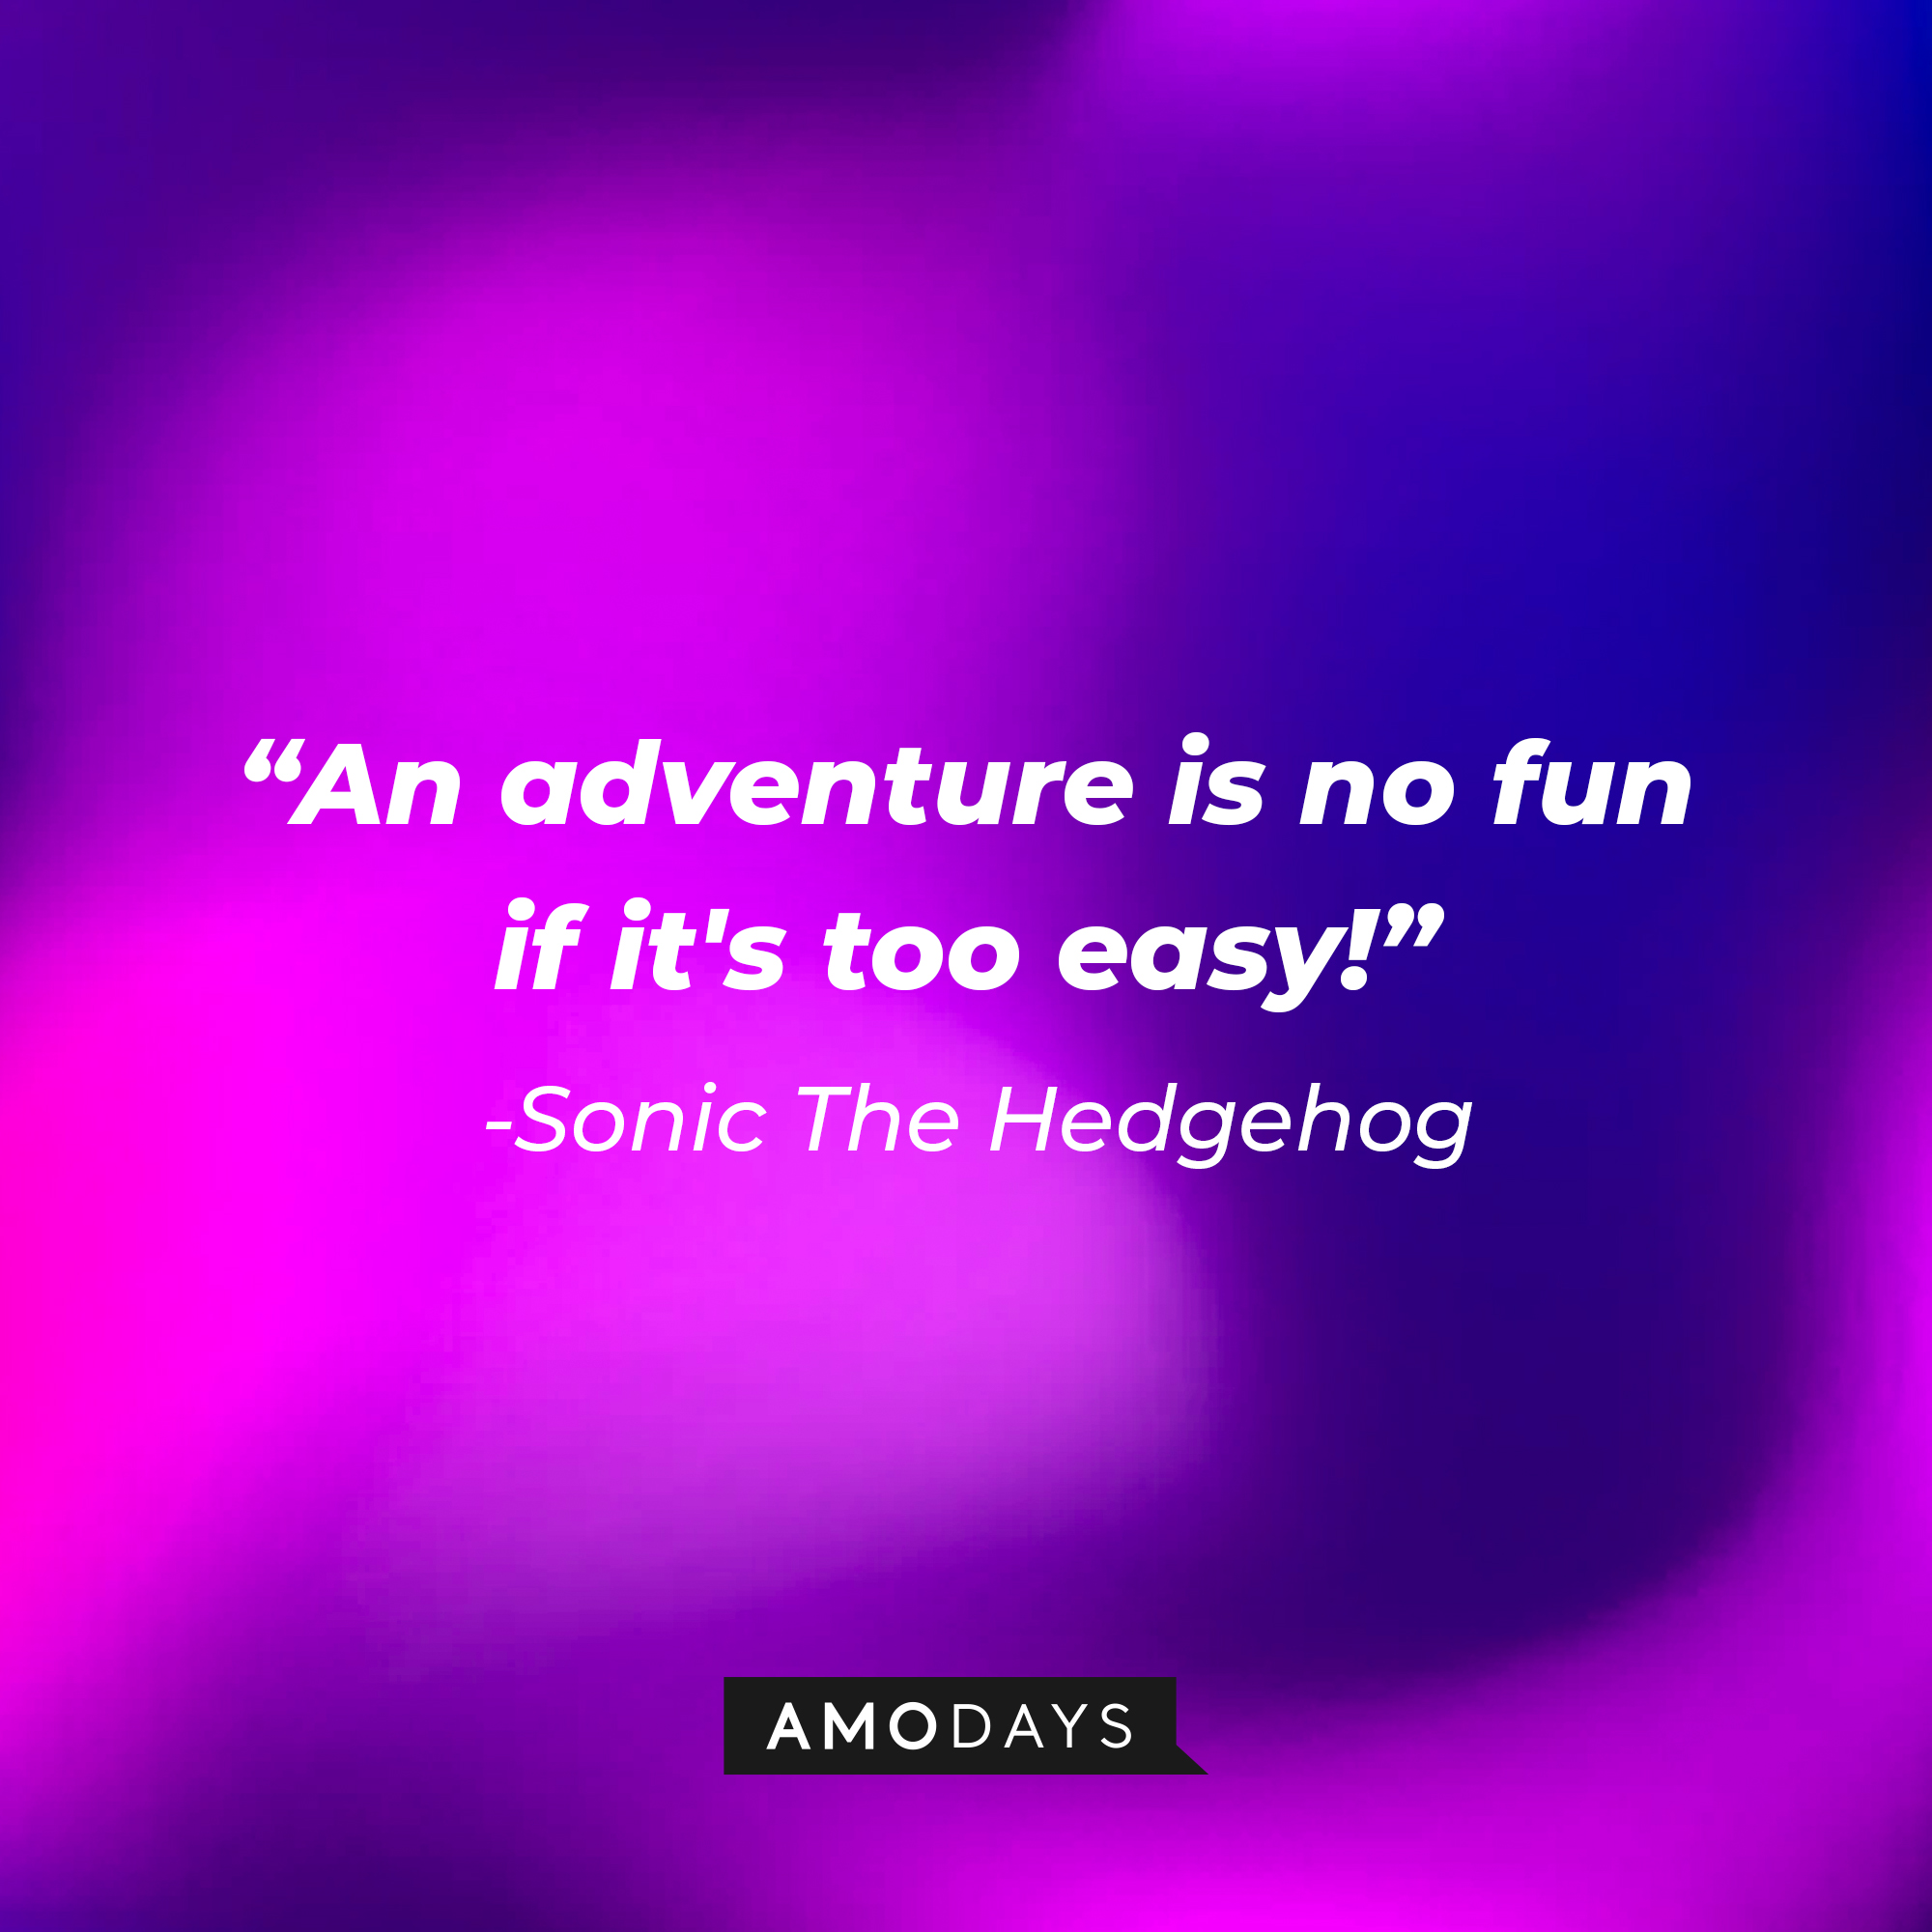 Sonic The Hedgehog's quote: "An adventure is no fun if it's too easy!" | Source: Amodays